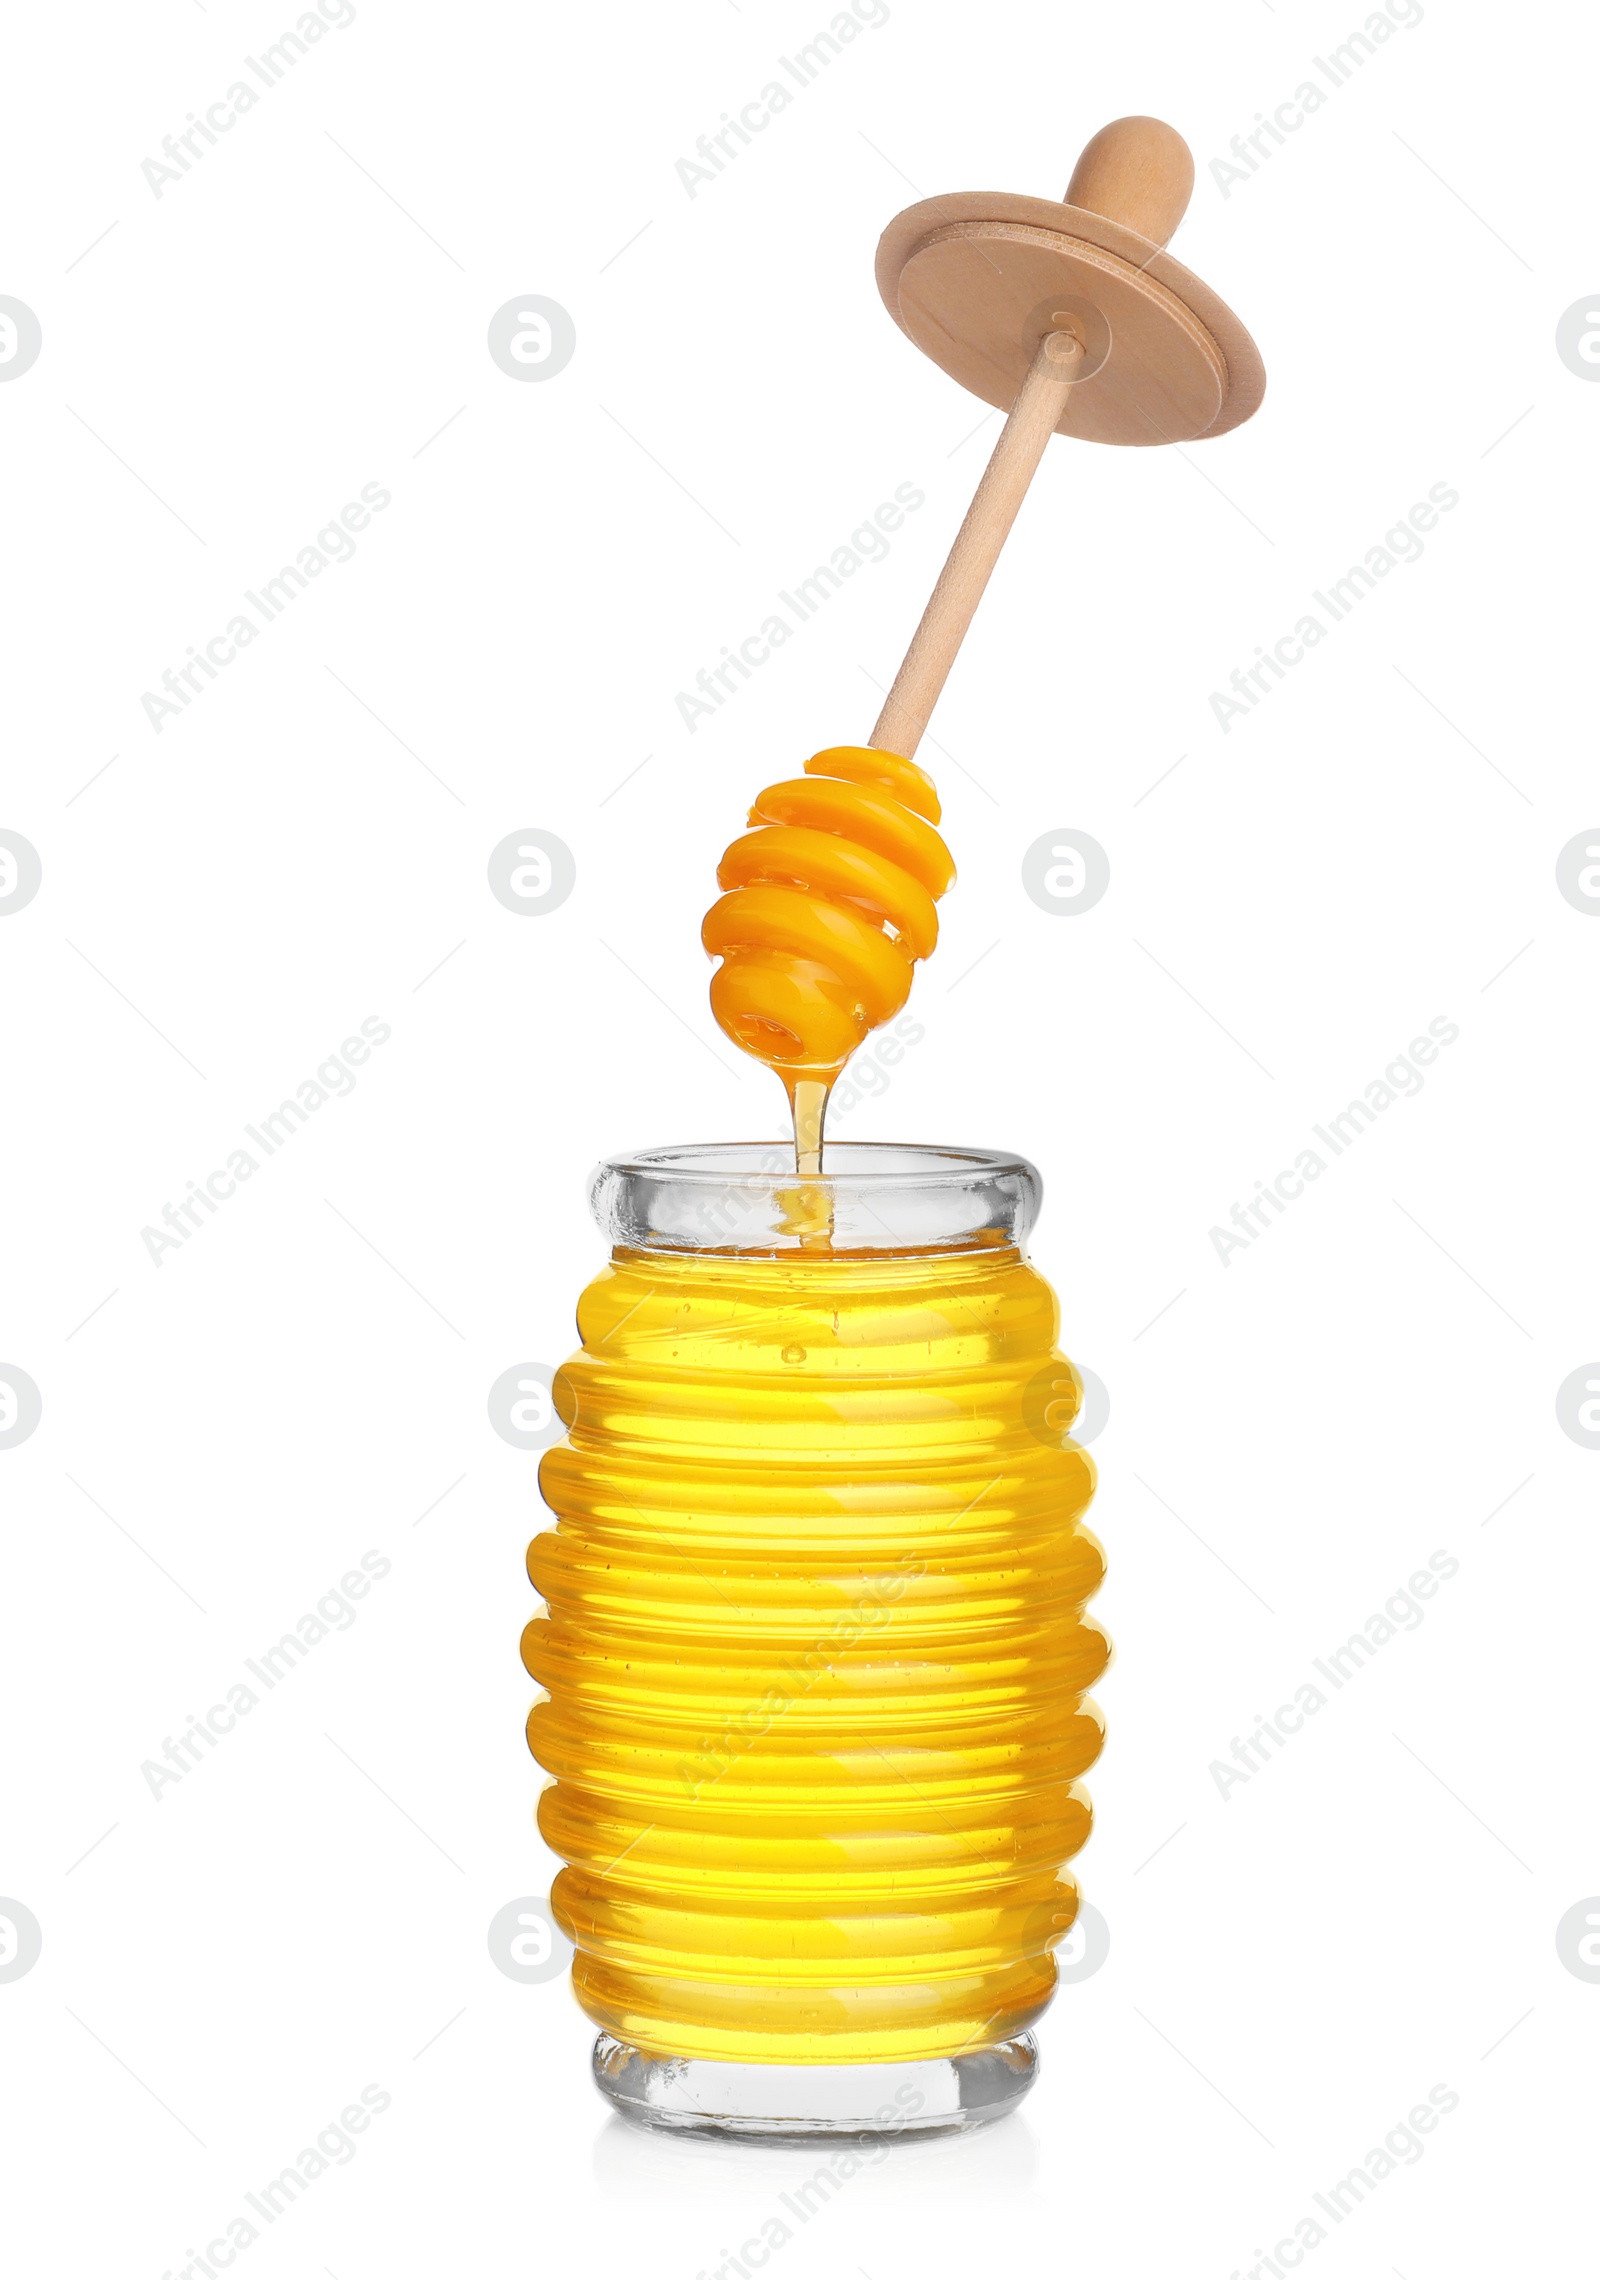 Photo of Honey dripping from dipper into jar isolated on white